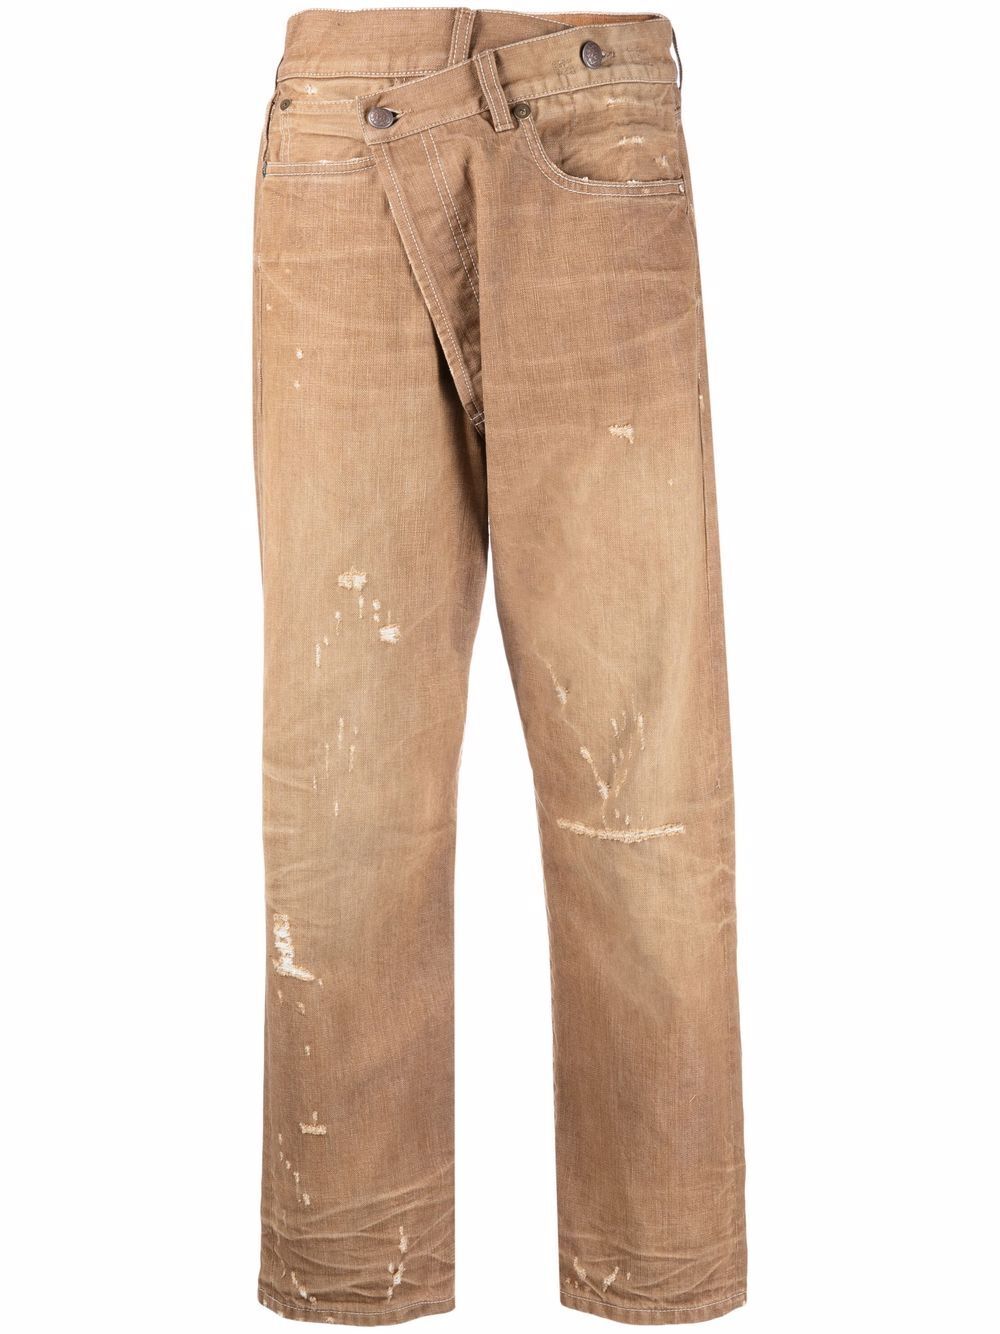 Crossover Jeans in Beige